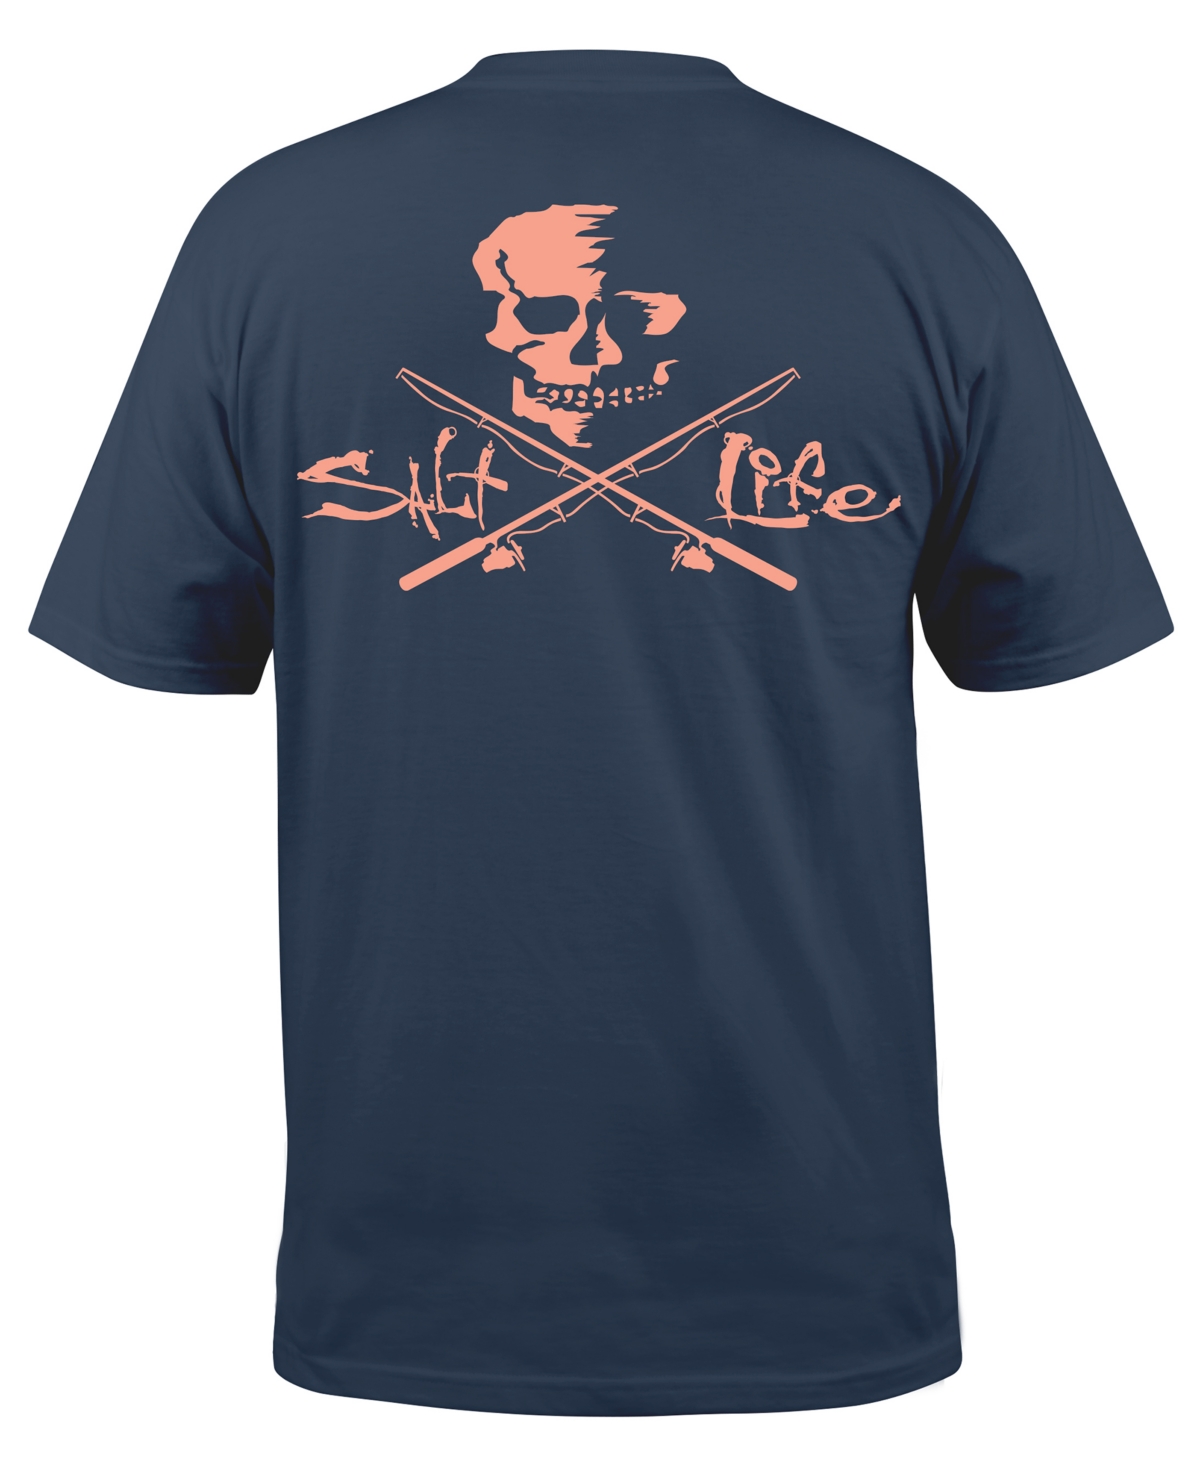 Men's Salt Life Skull And Poles Graphic Short-Sleeve T-Shirt - Washed Navy